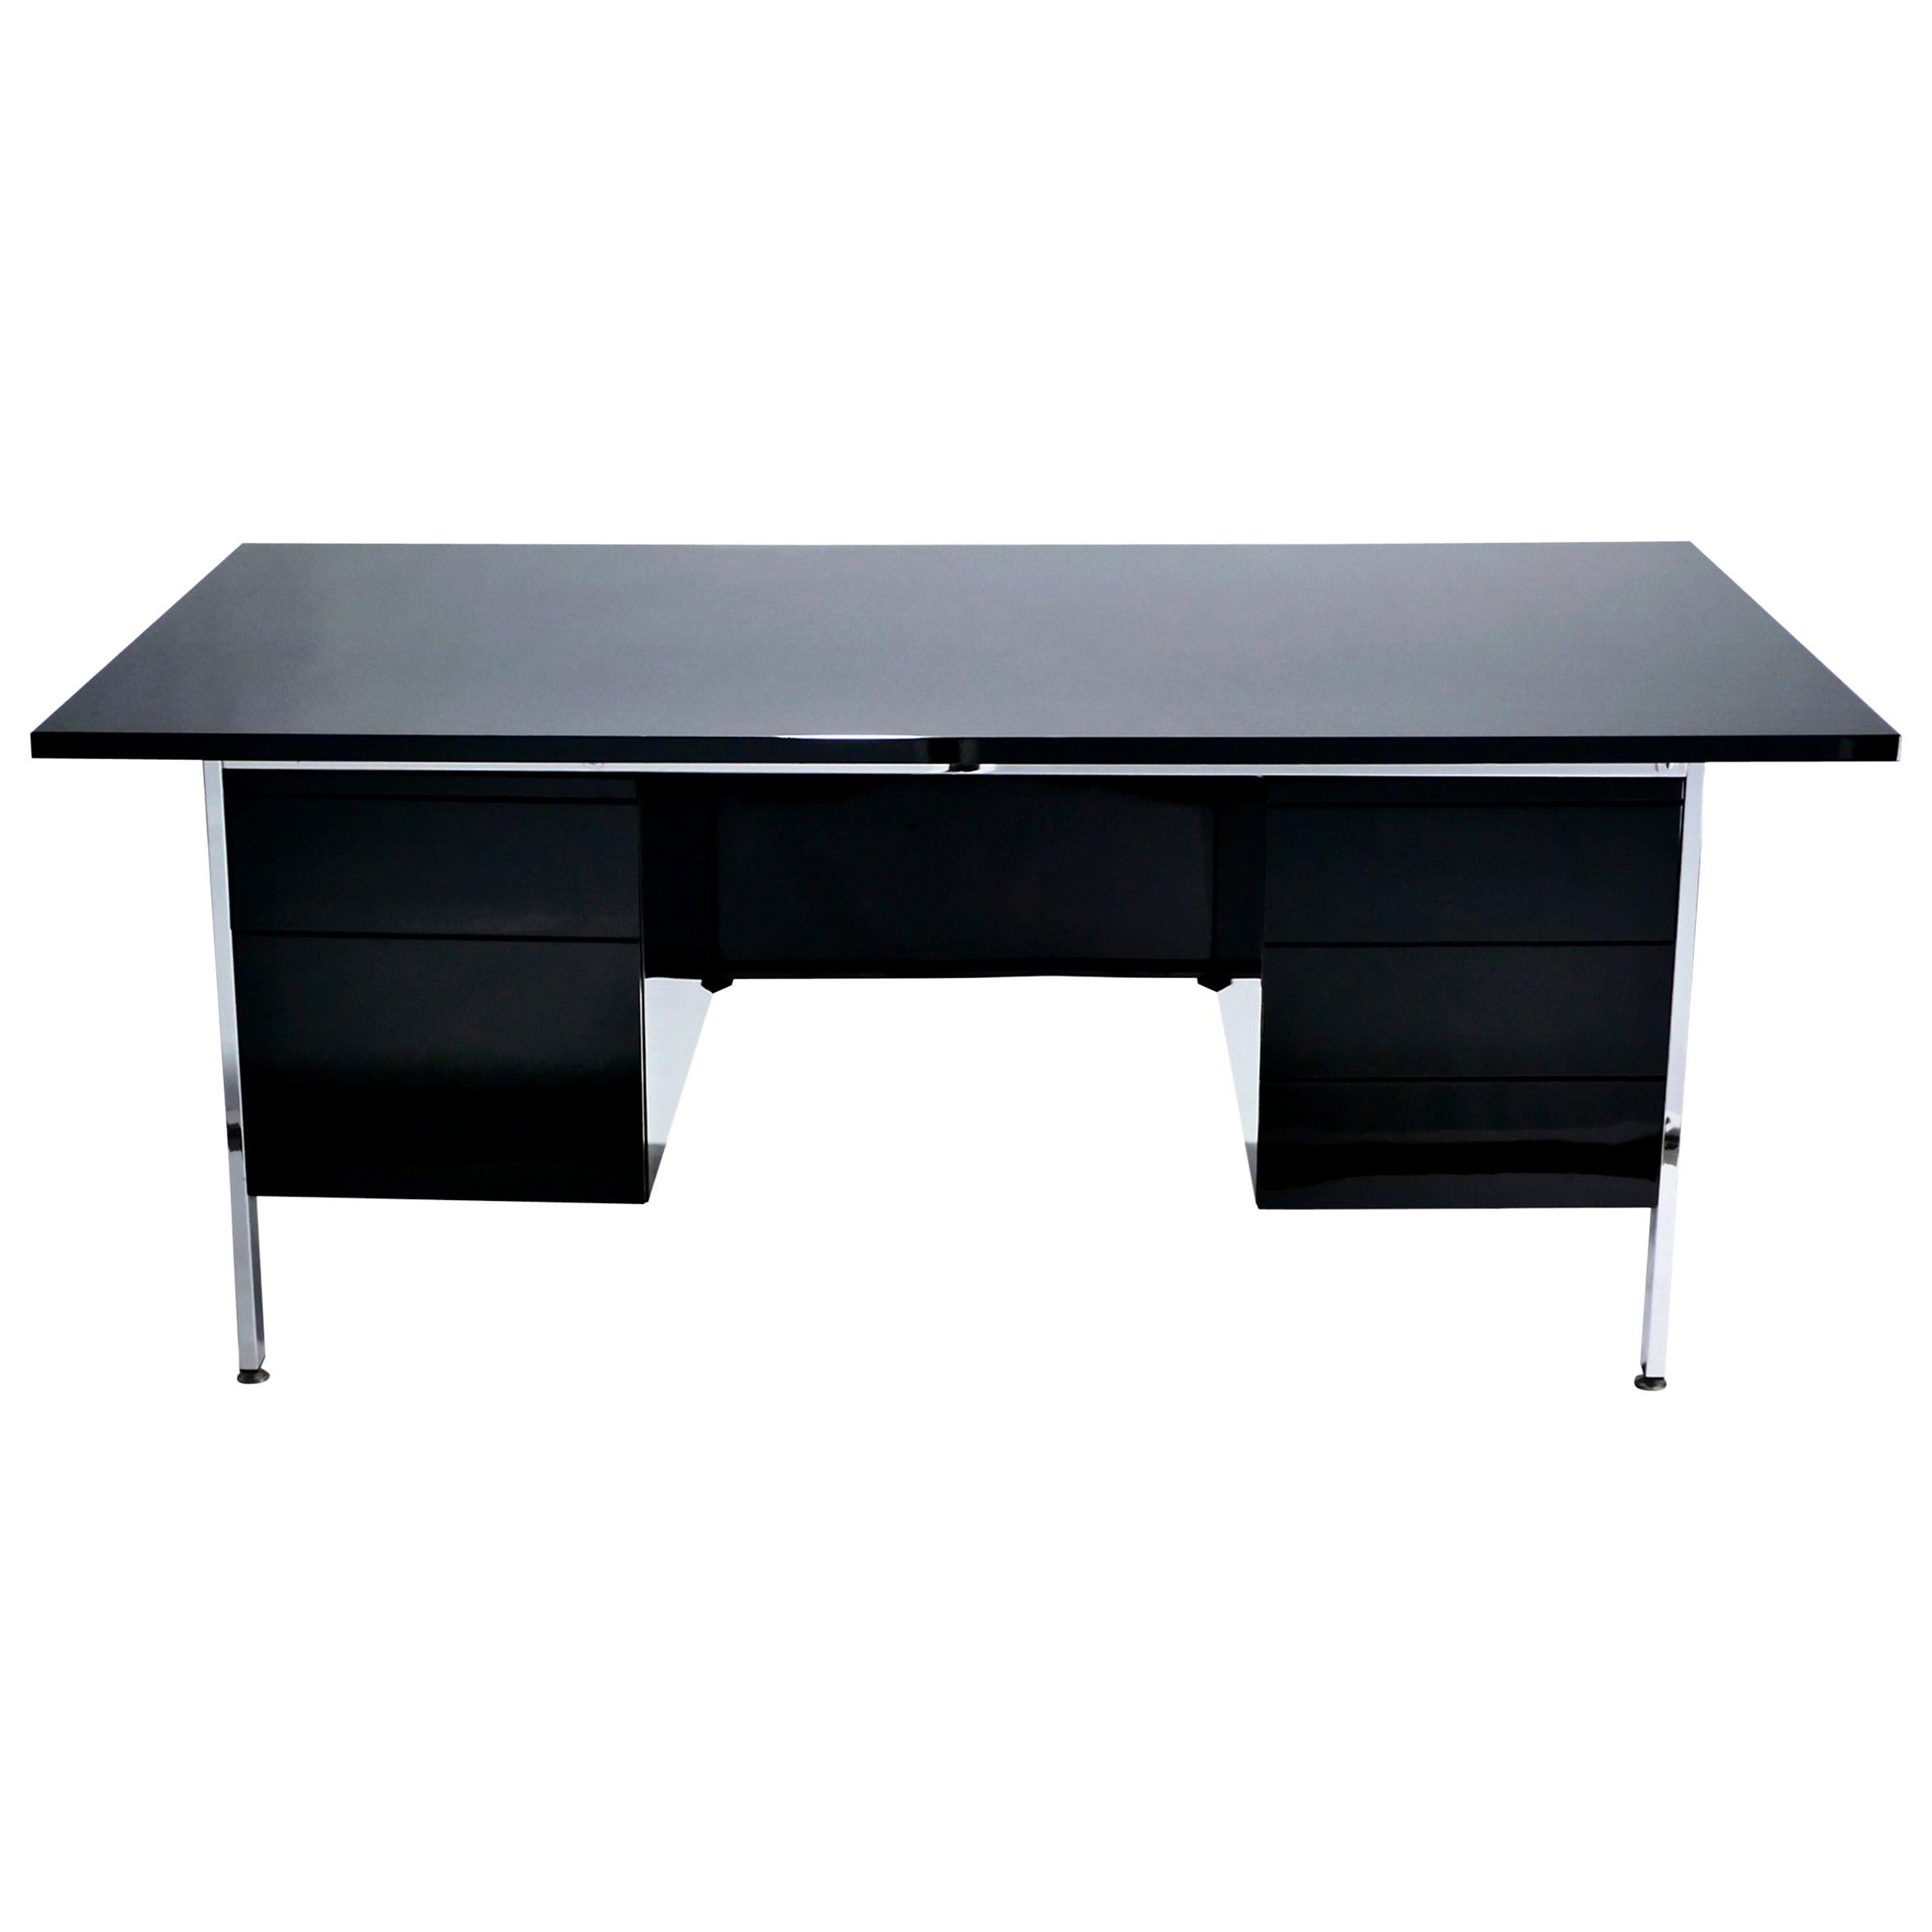 Perfect Mid-Century Modern proportions, designed by Florence Knoll for Knoll International in 1955, this desk model 1503 has a decidedly vintage mood. The black lacquer surfaces and chrome feet and accents look contemporary enough for the piece to